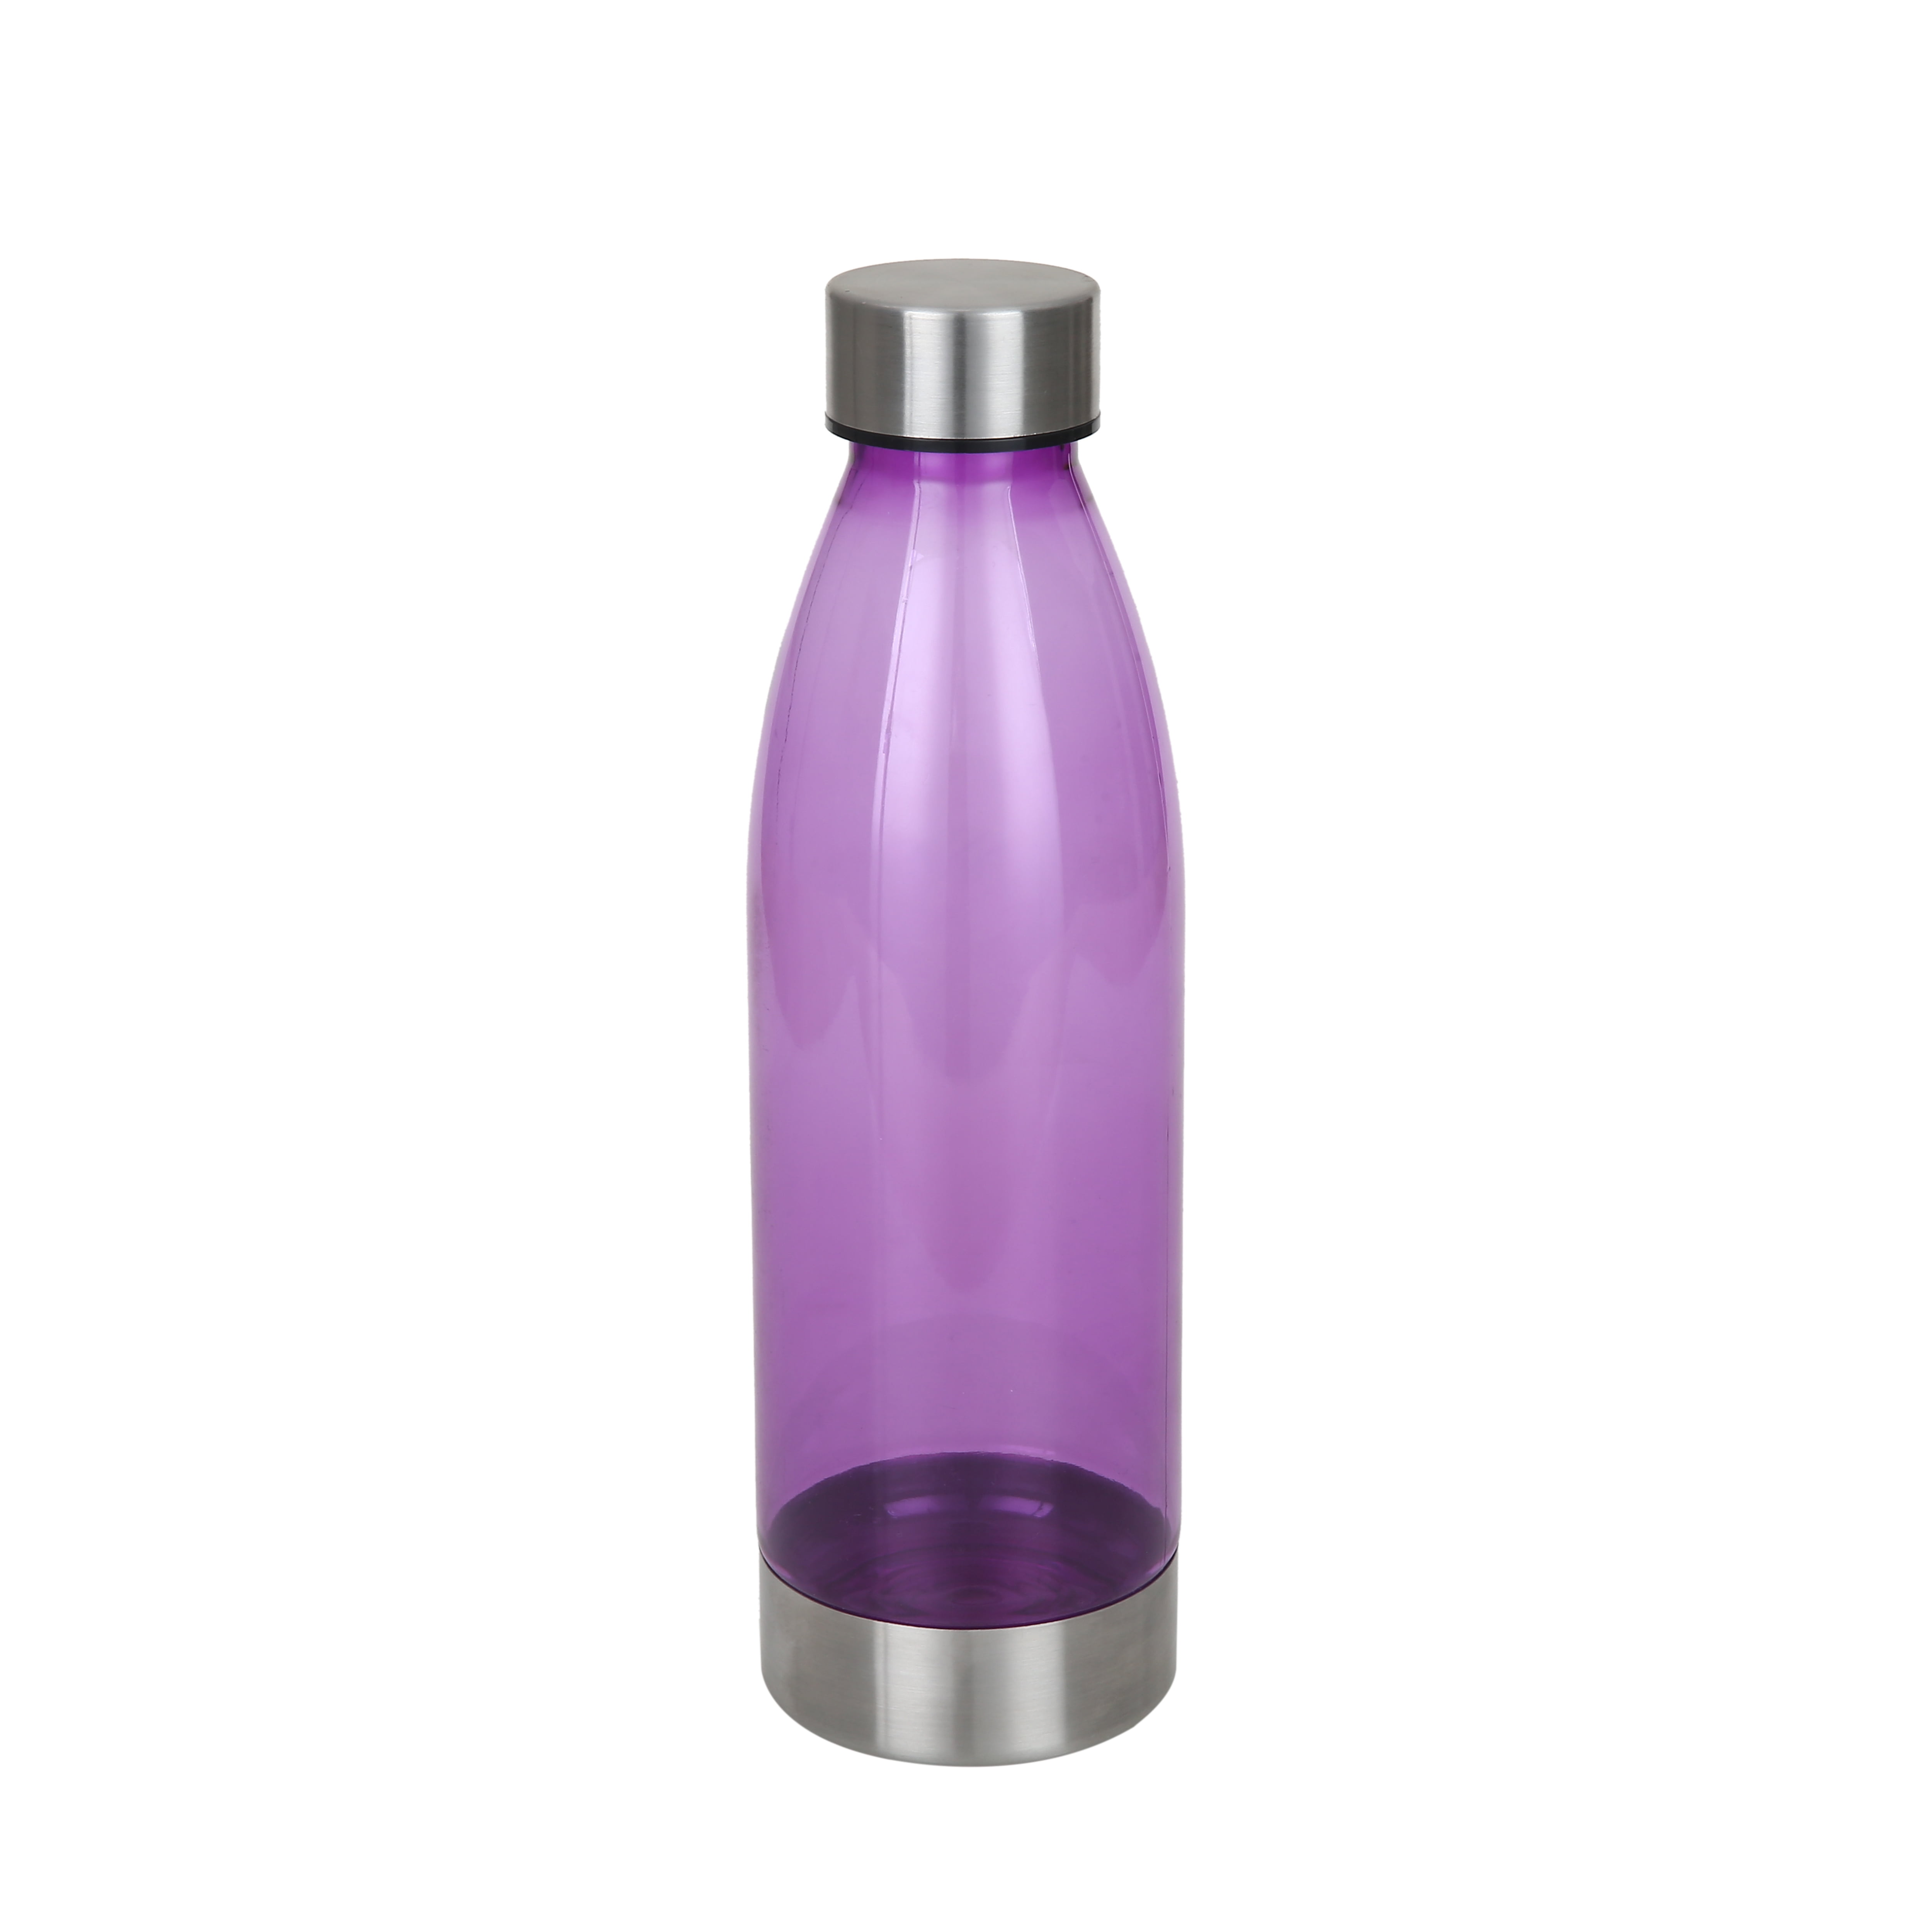 Mainstays 22 oz Blue and Silver Plastic Water Bottle with Screw Cap 